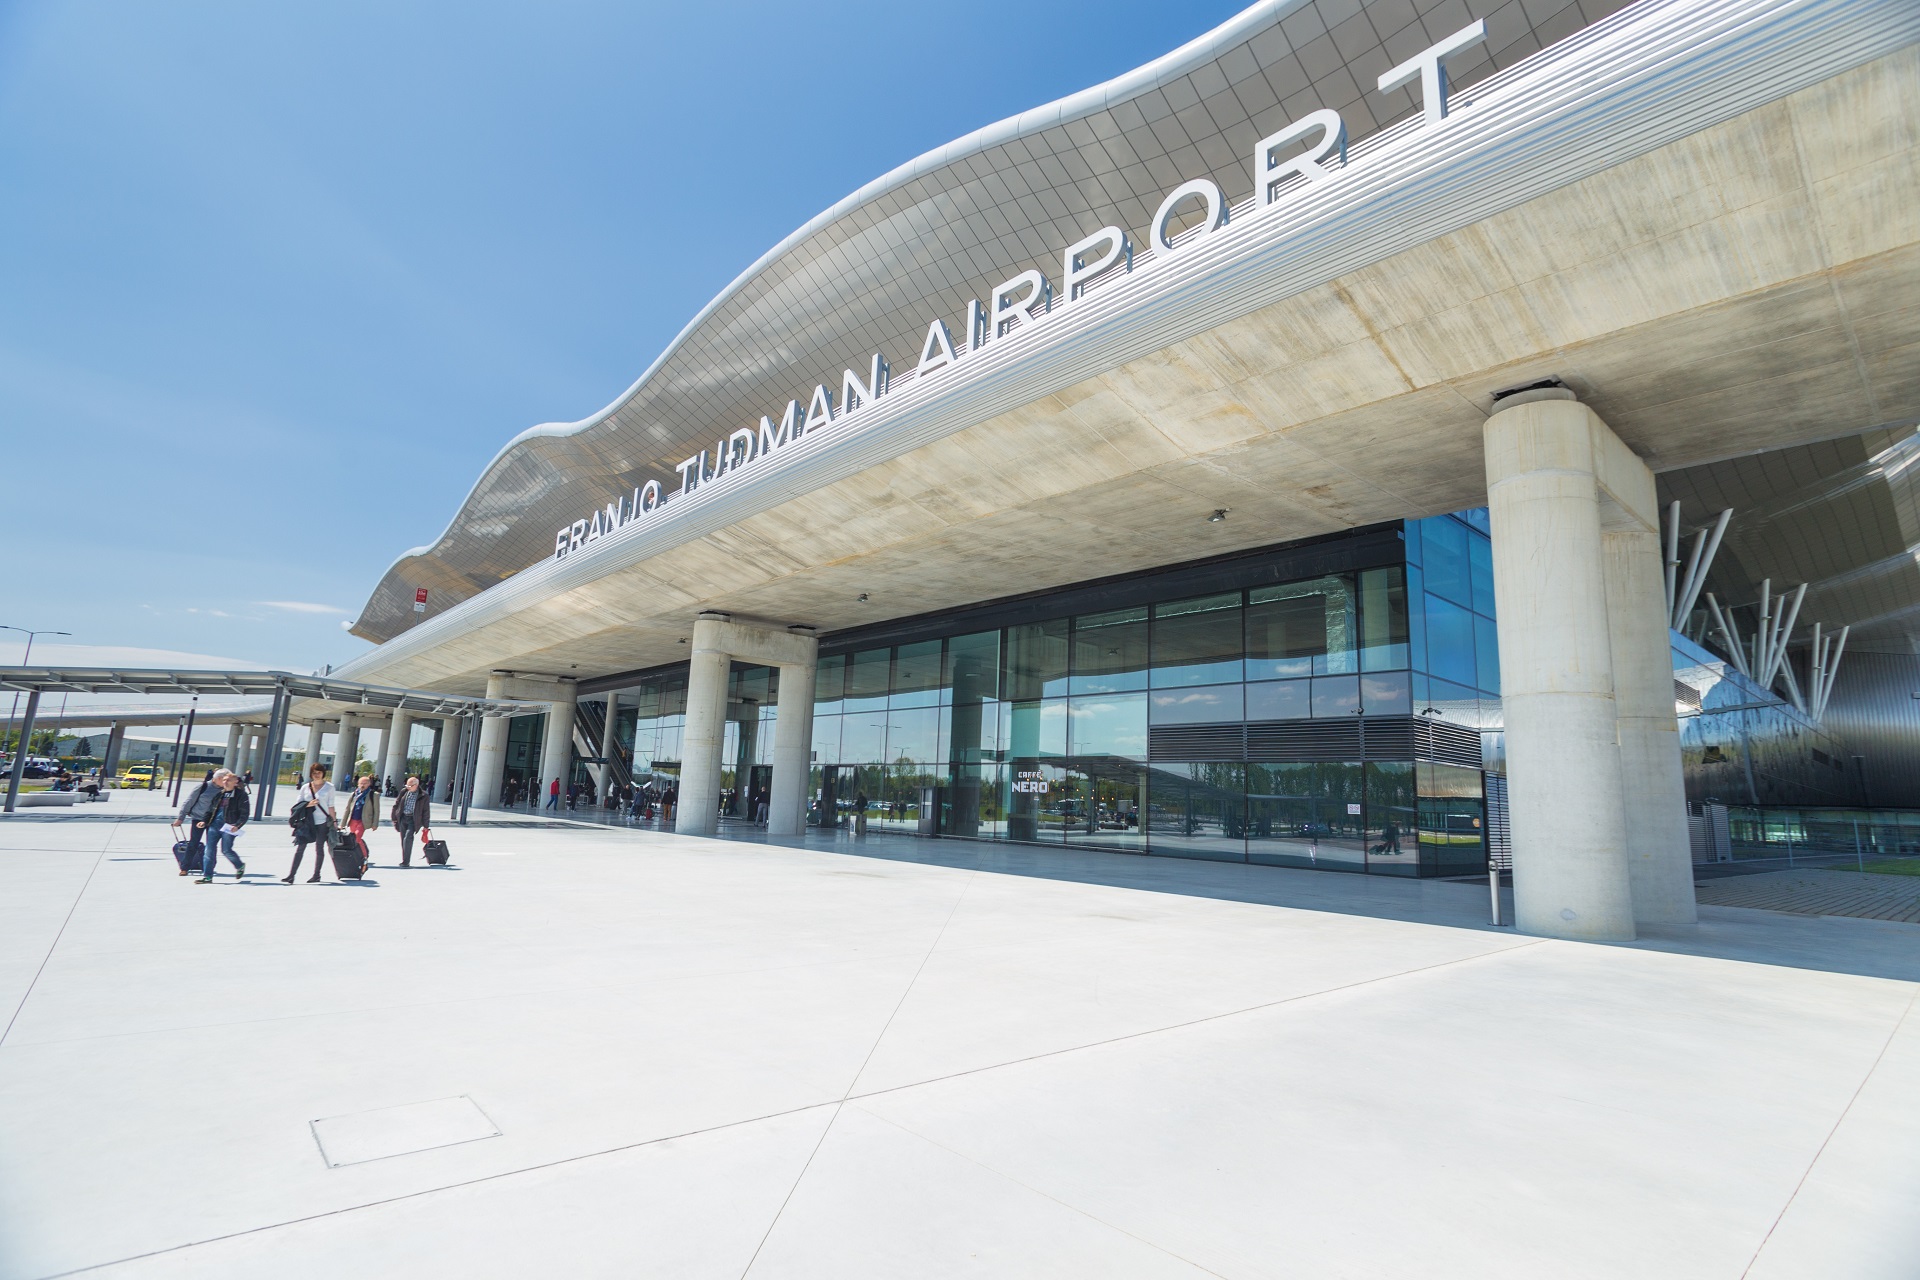 Record Number of Passengers use Zagreb Airport in 2019